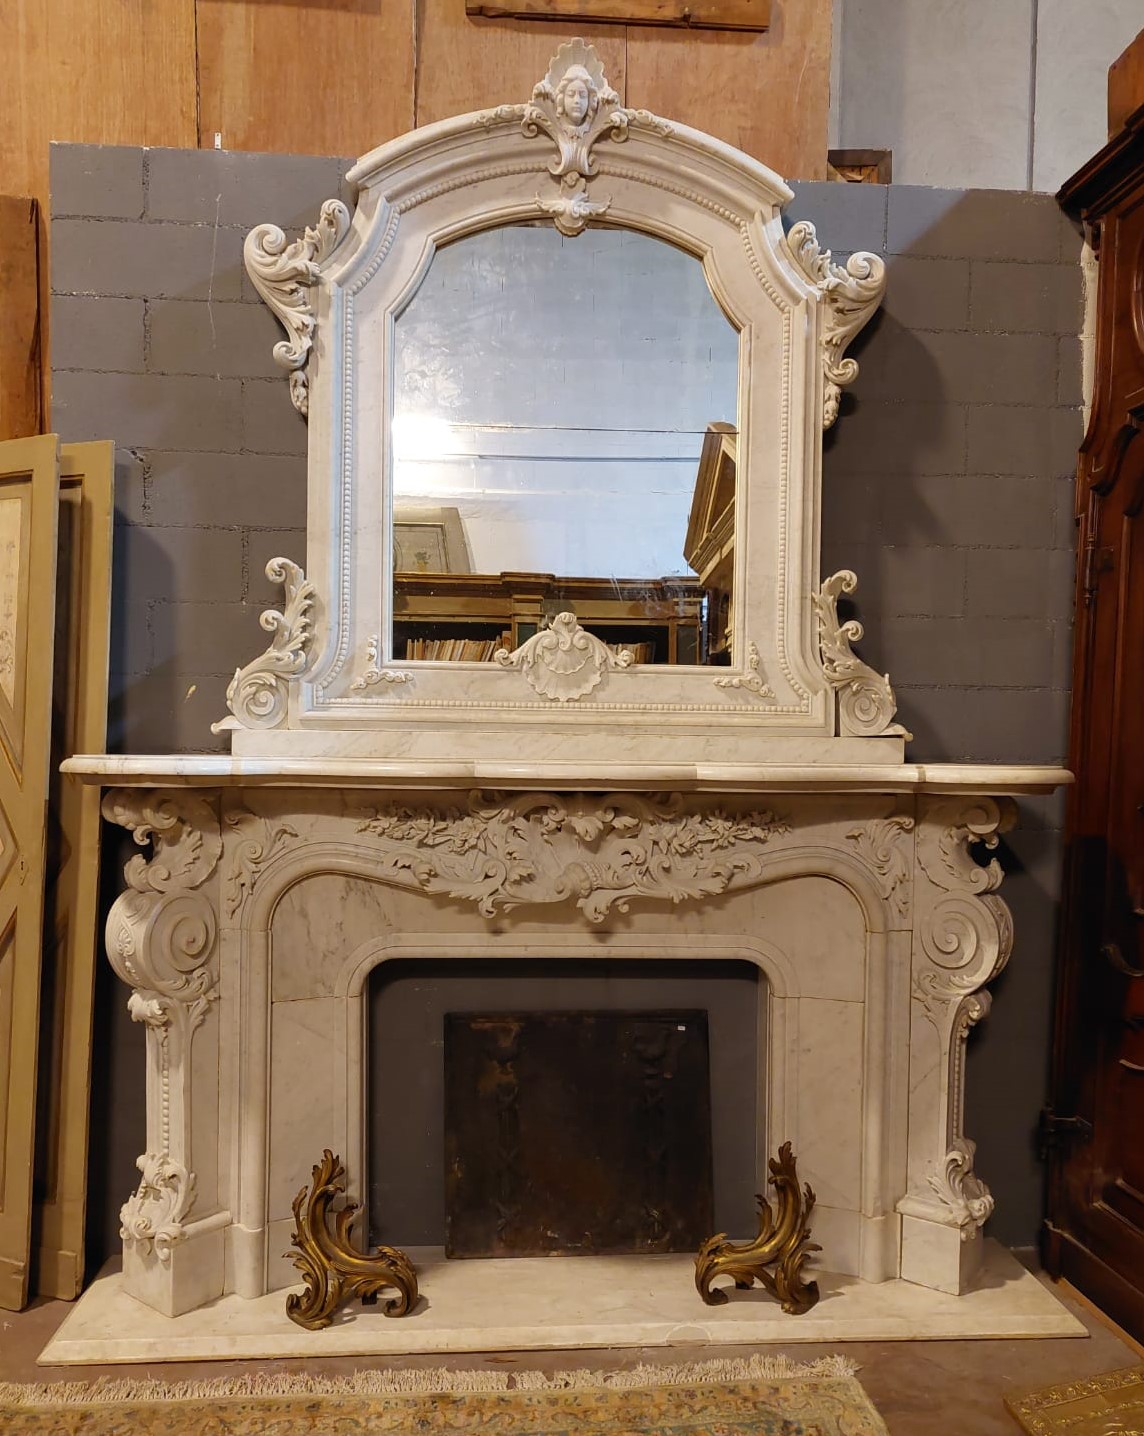 A chm707 - fireplace in statuary white marble, meas. cm w 250 x h 328 x d. 51